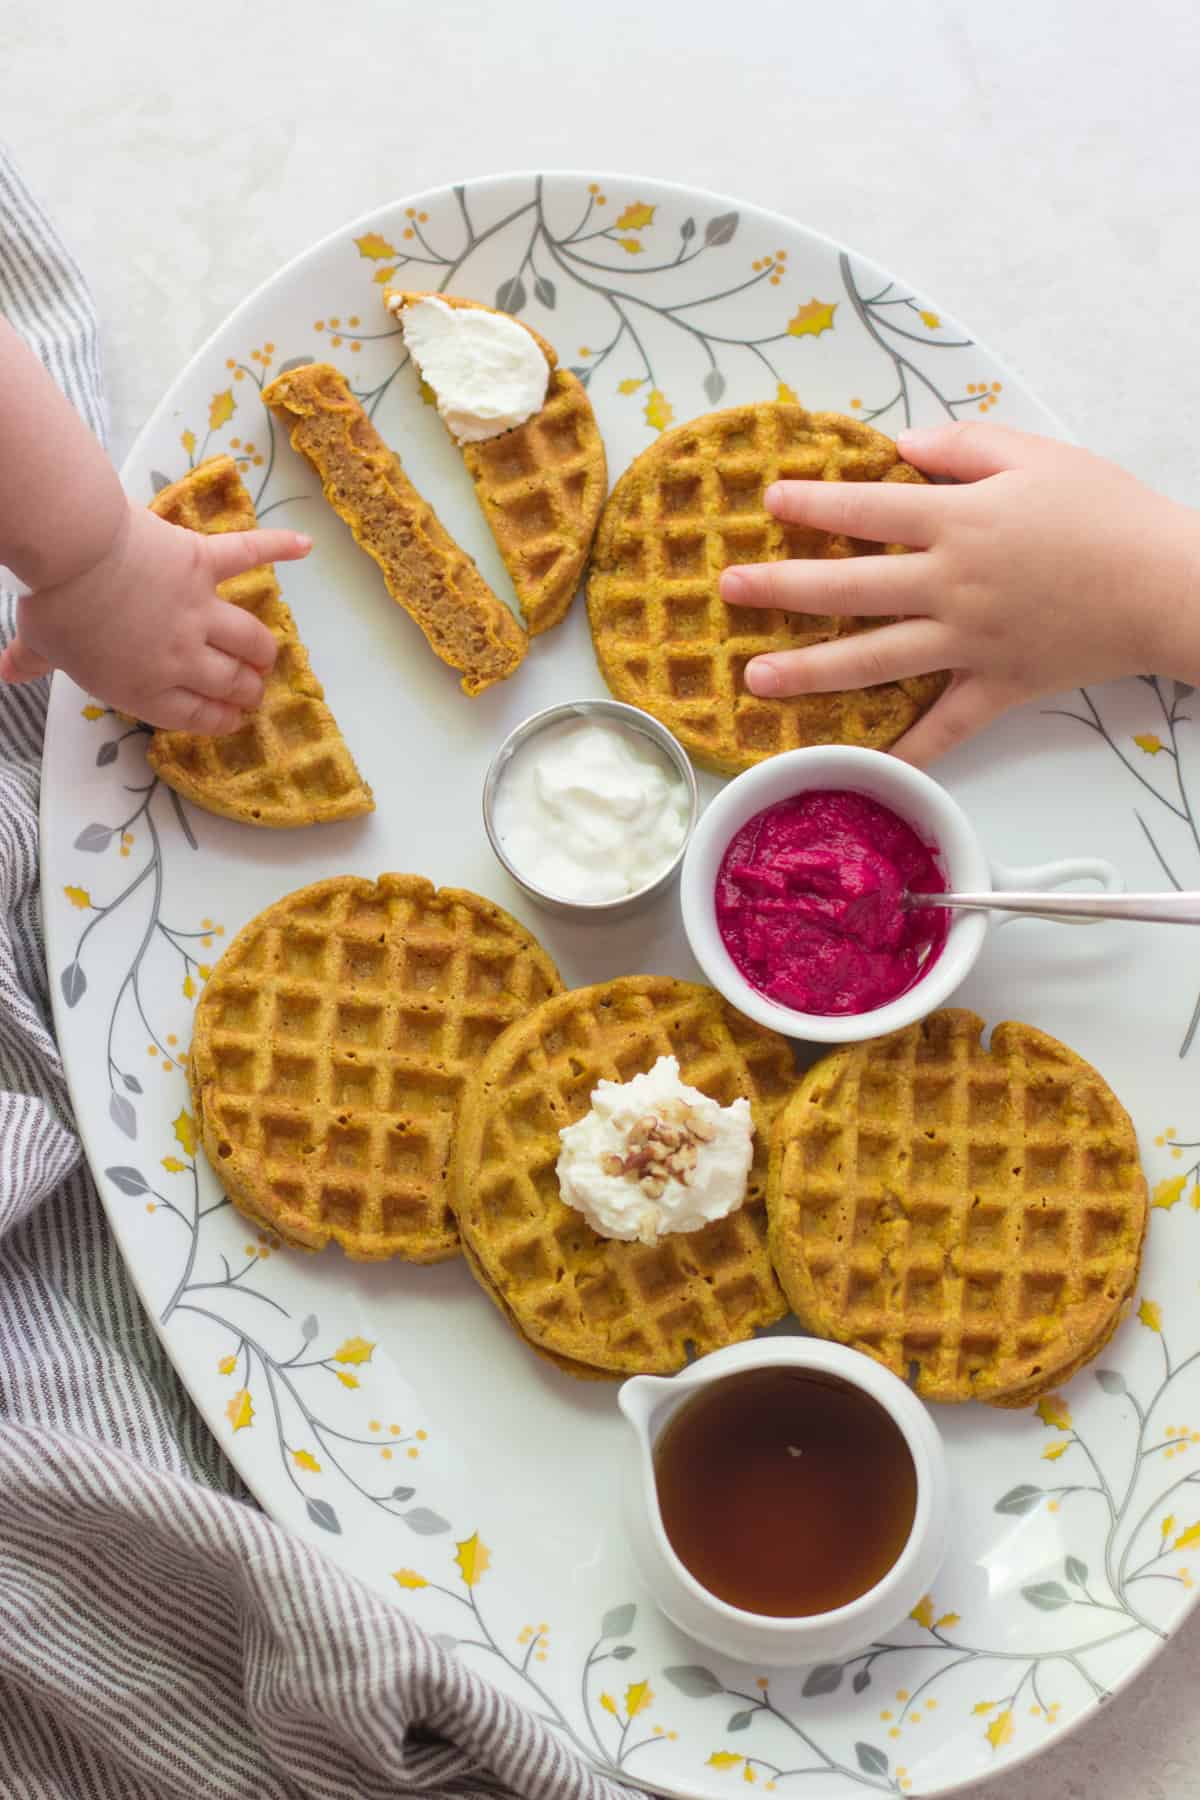 A large plate with cooked waffles, toppings, and little hands grabbing them.